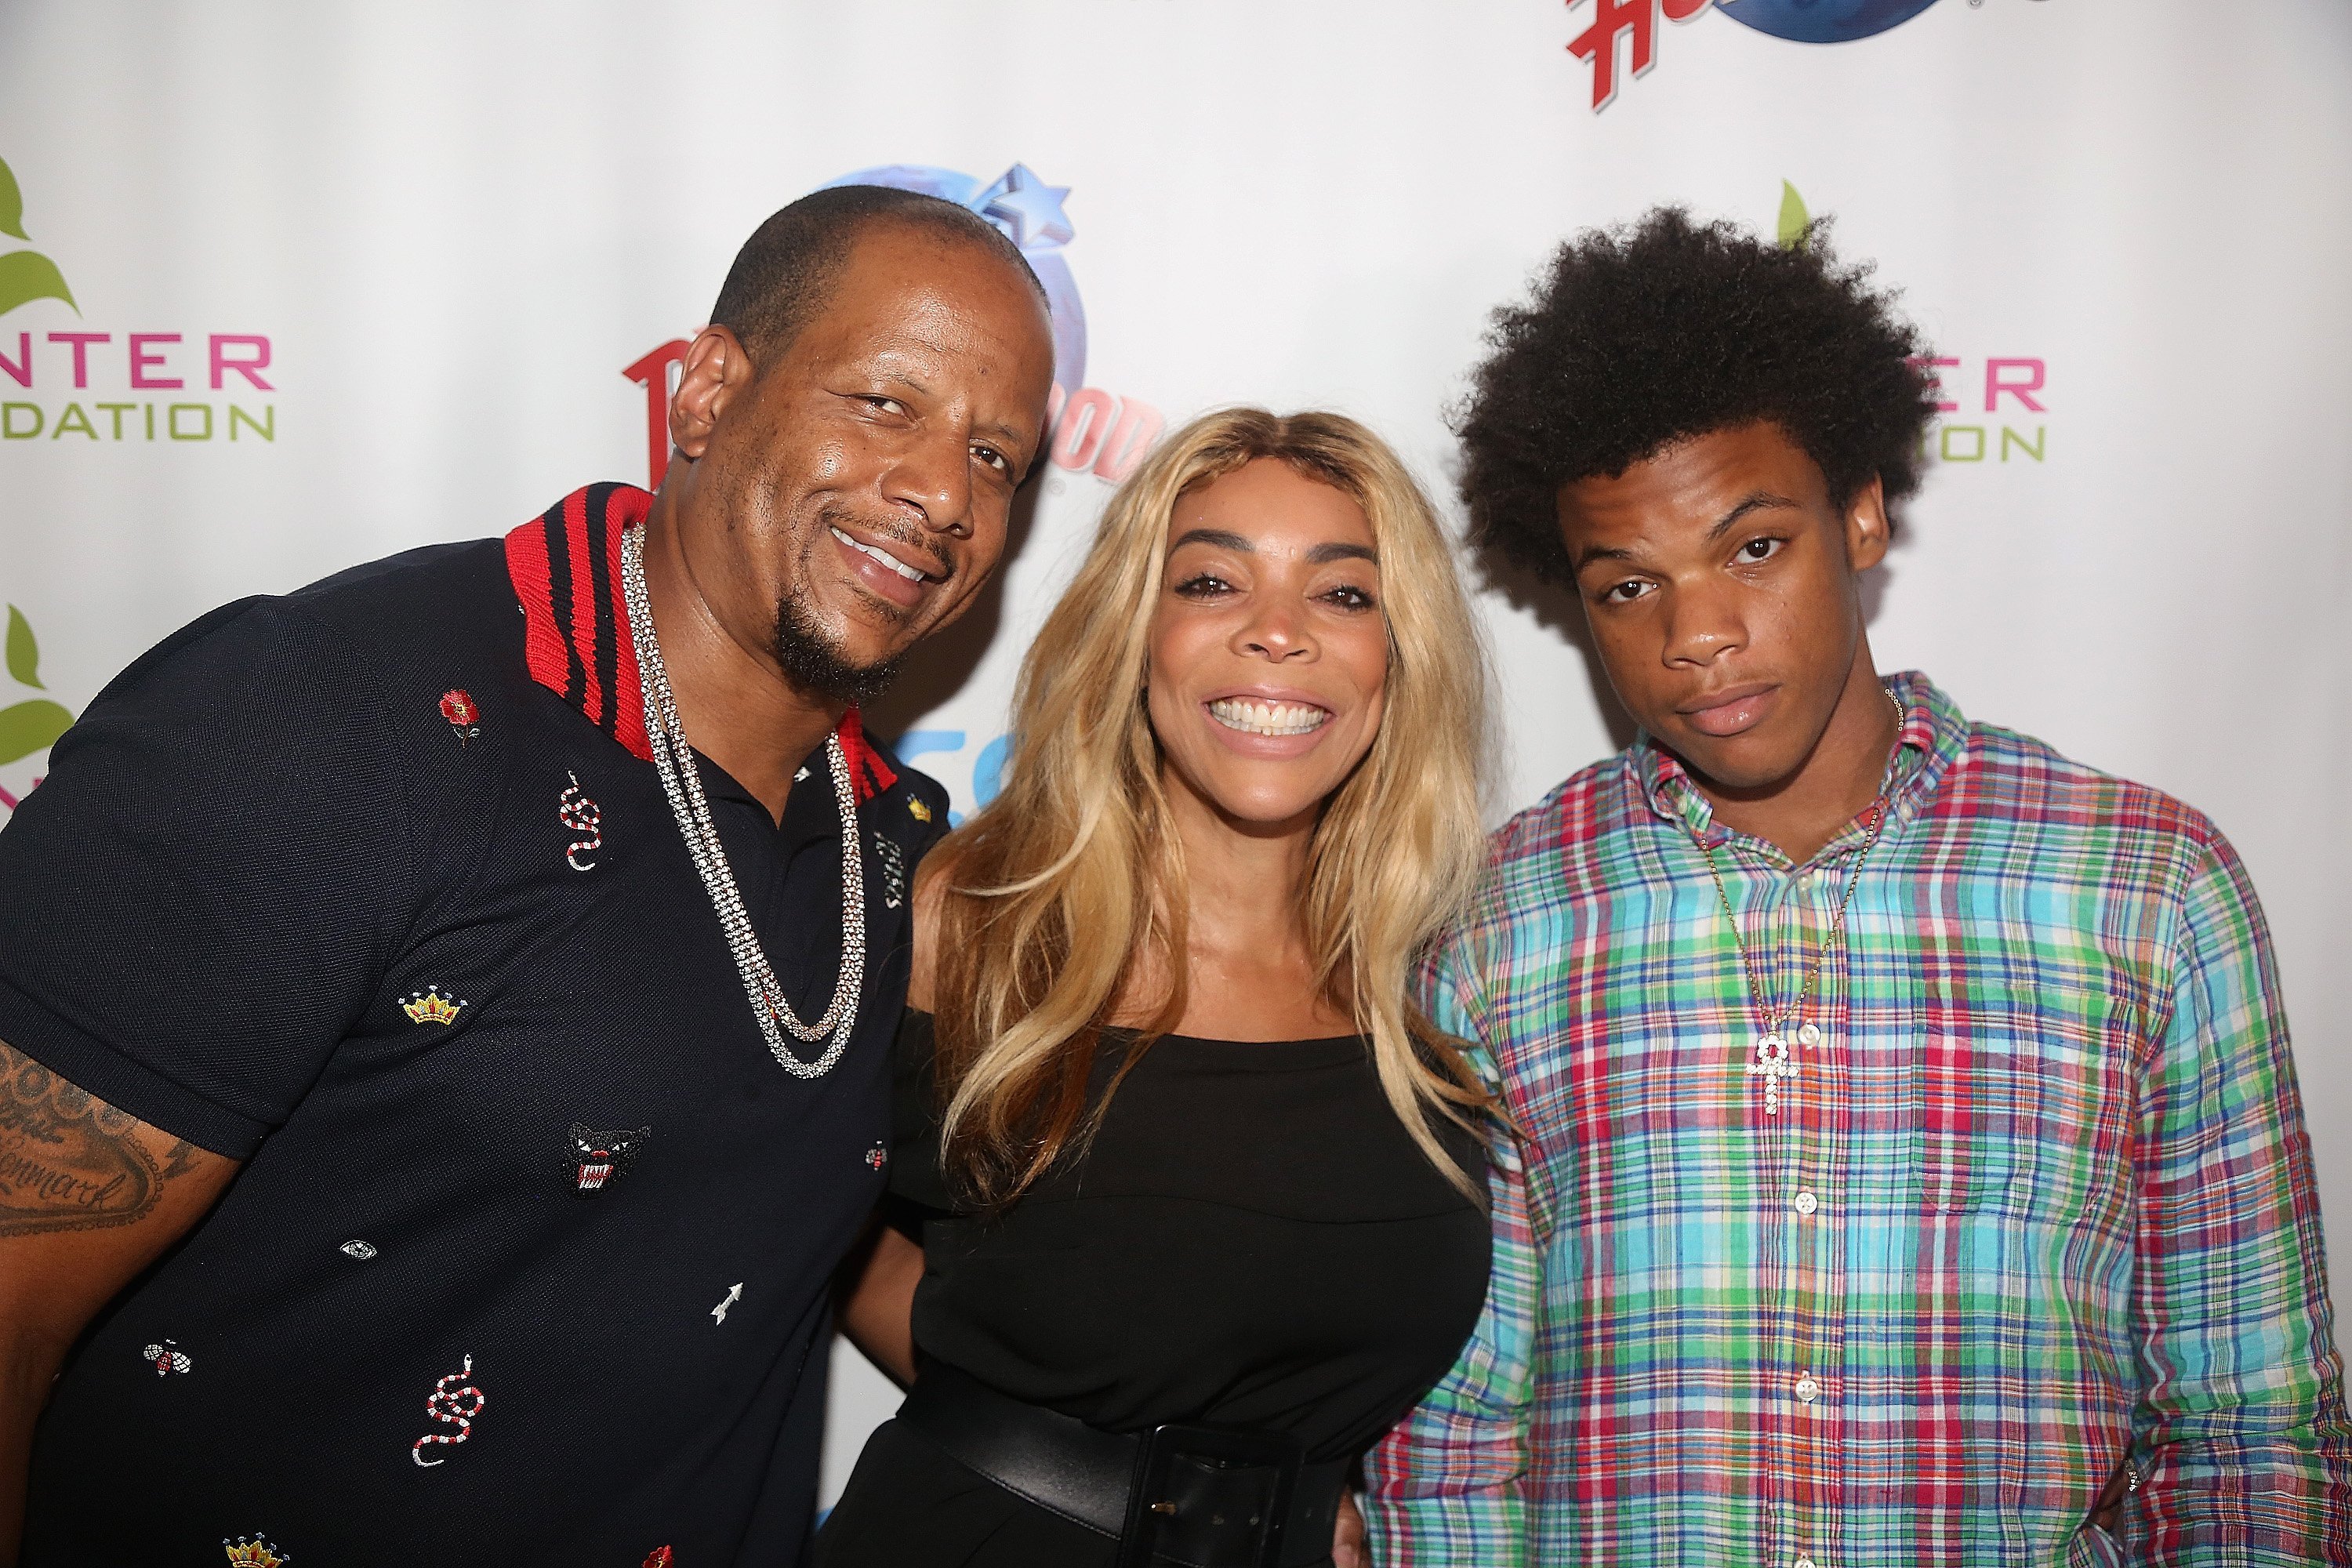 Kevin Hunter, Wendy Williams and their only son and child, Kevin Hunter, Jr. celebrating the couple's Hunter Foundation in July 2017. | Photo: Getty Images